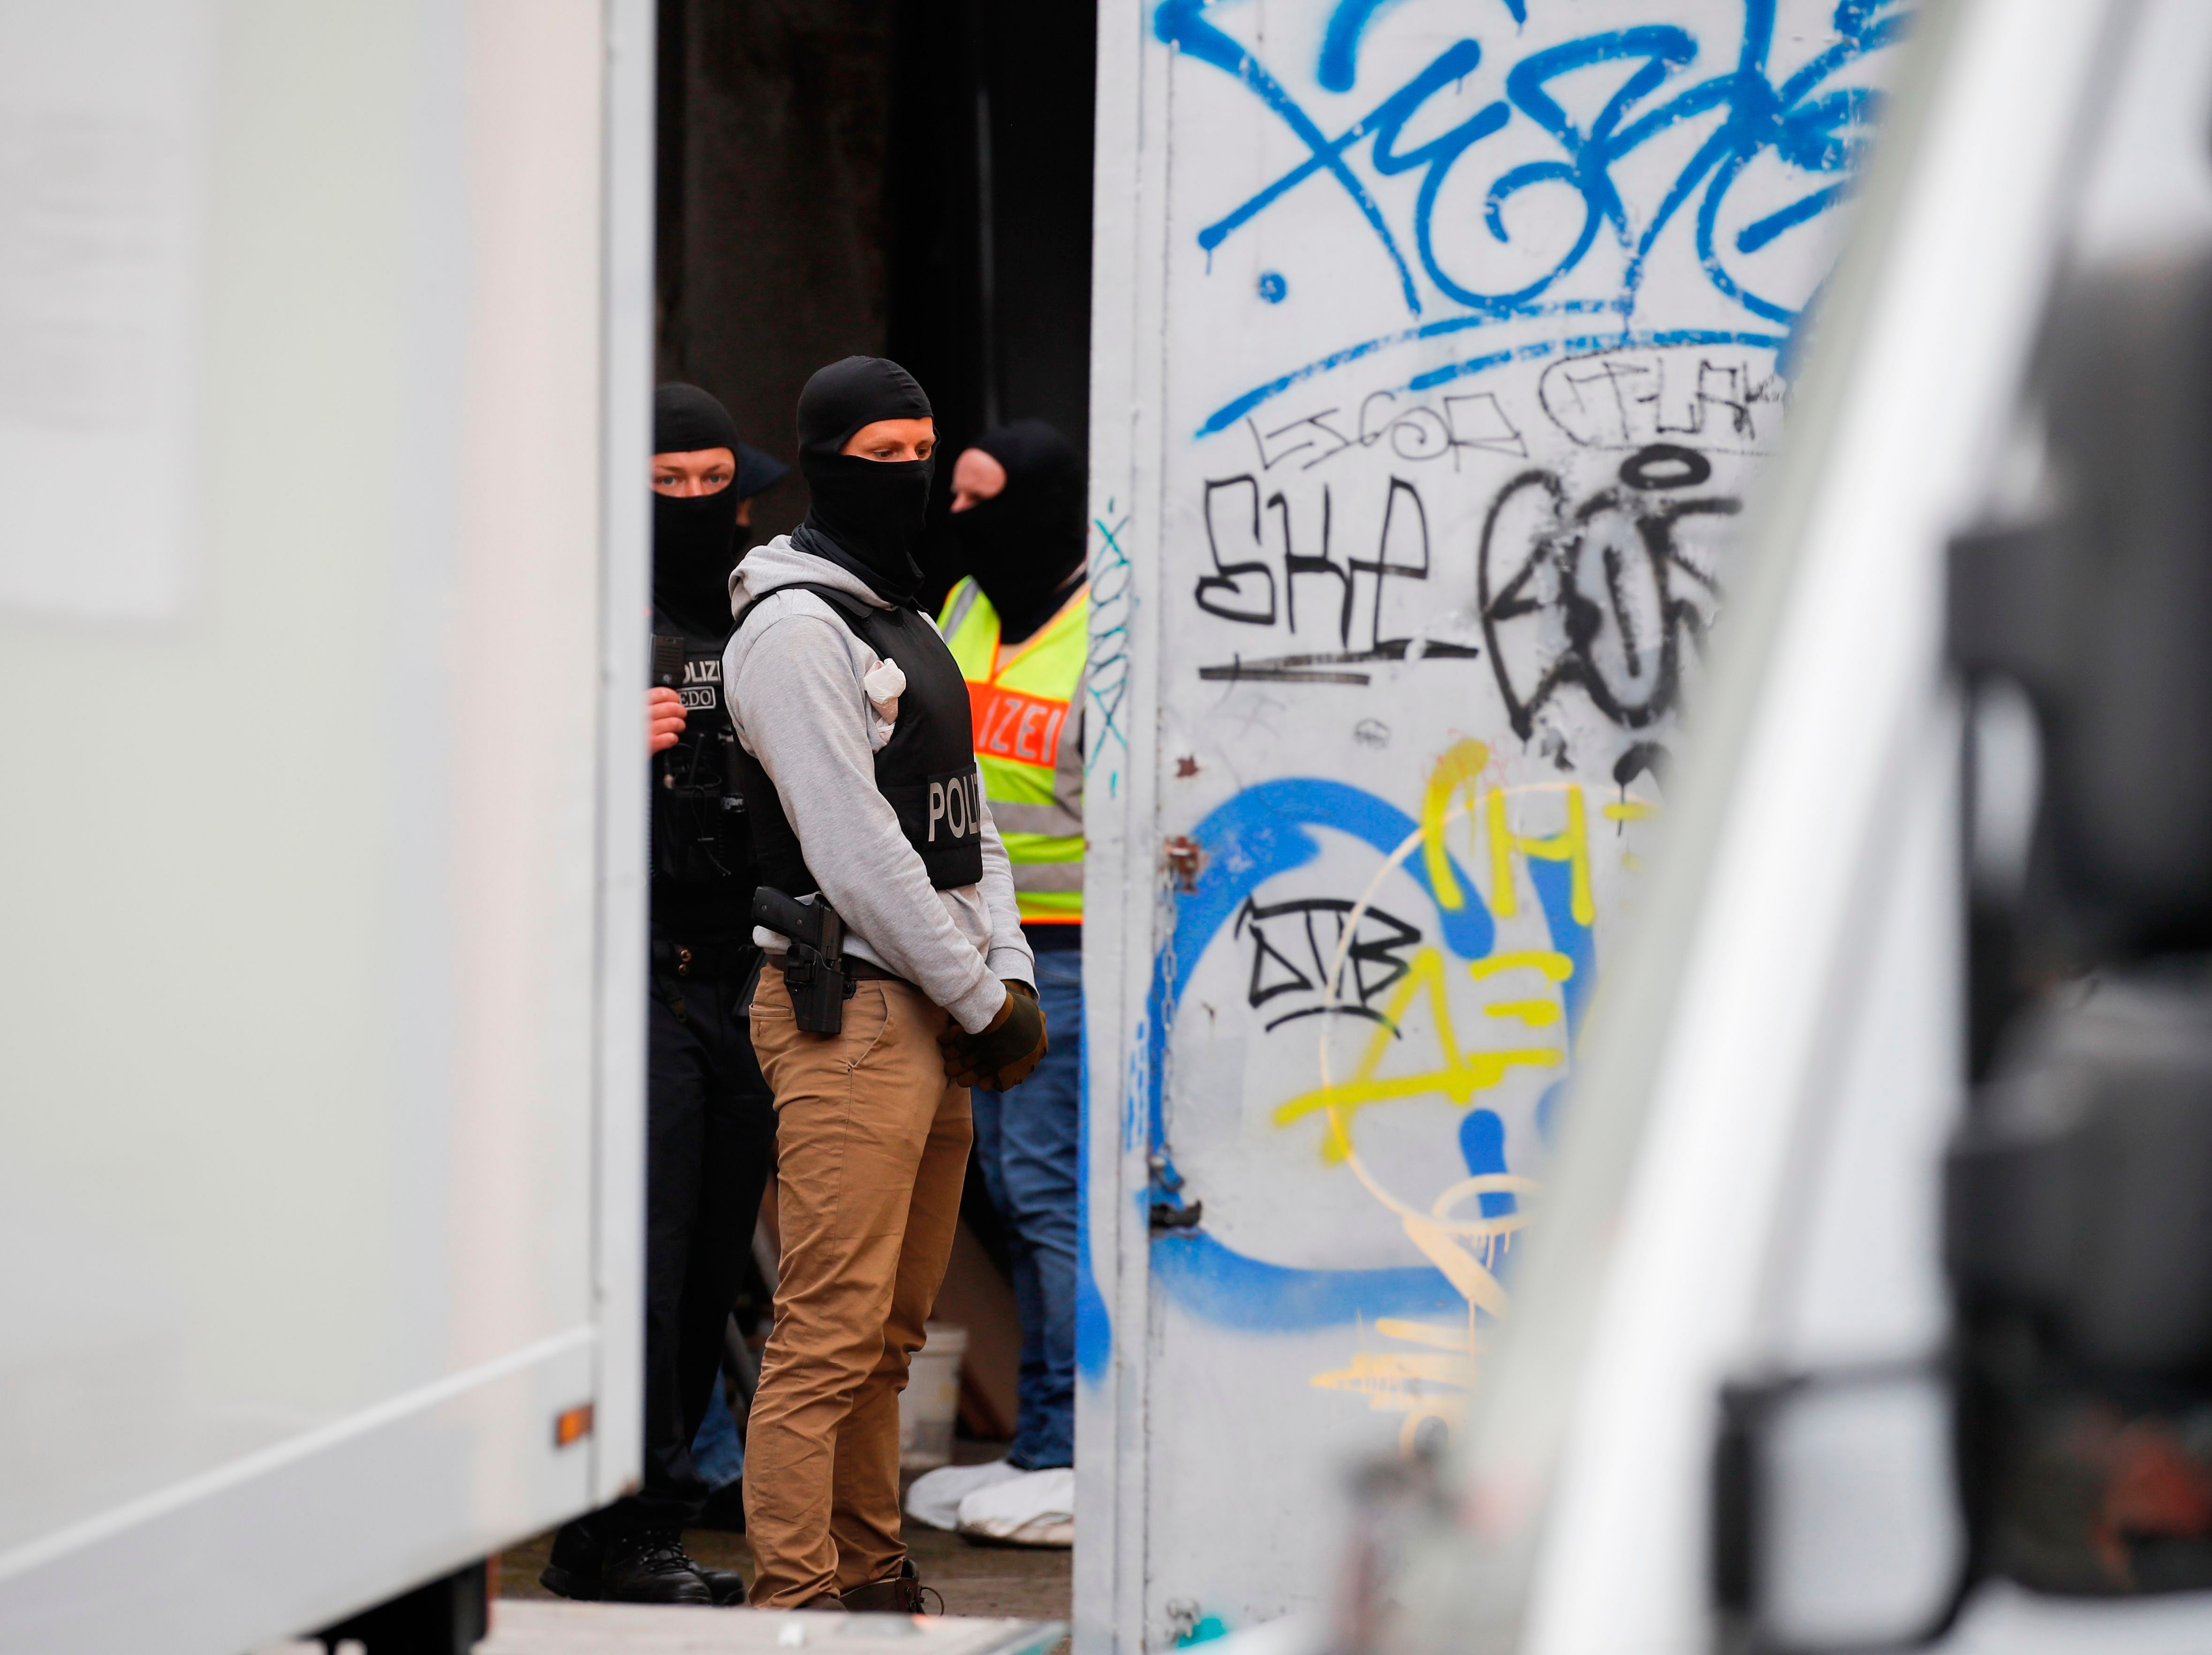 Police stand in the backyard of Al-Irschad Mosque during a raid on April 30, 2020 in Berlin, as dozens of police and special forces stormed mosques and associations linked to Hezbollah in Bremen, Berlin, Dortmund and Muenster in the early hours of the morning. (AFP)